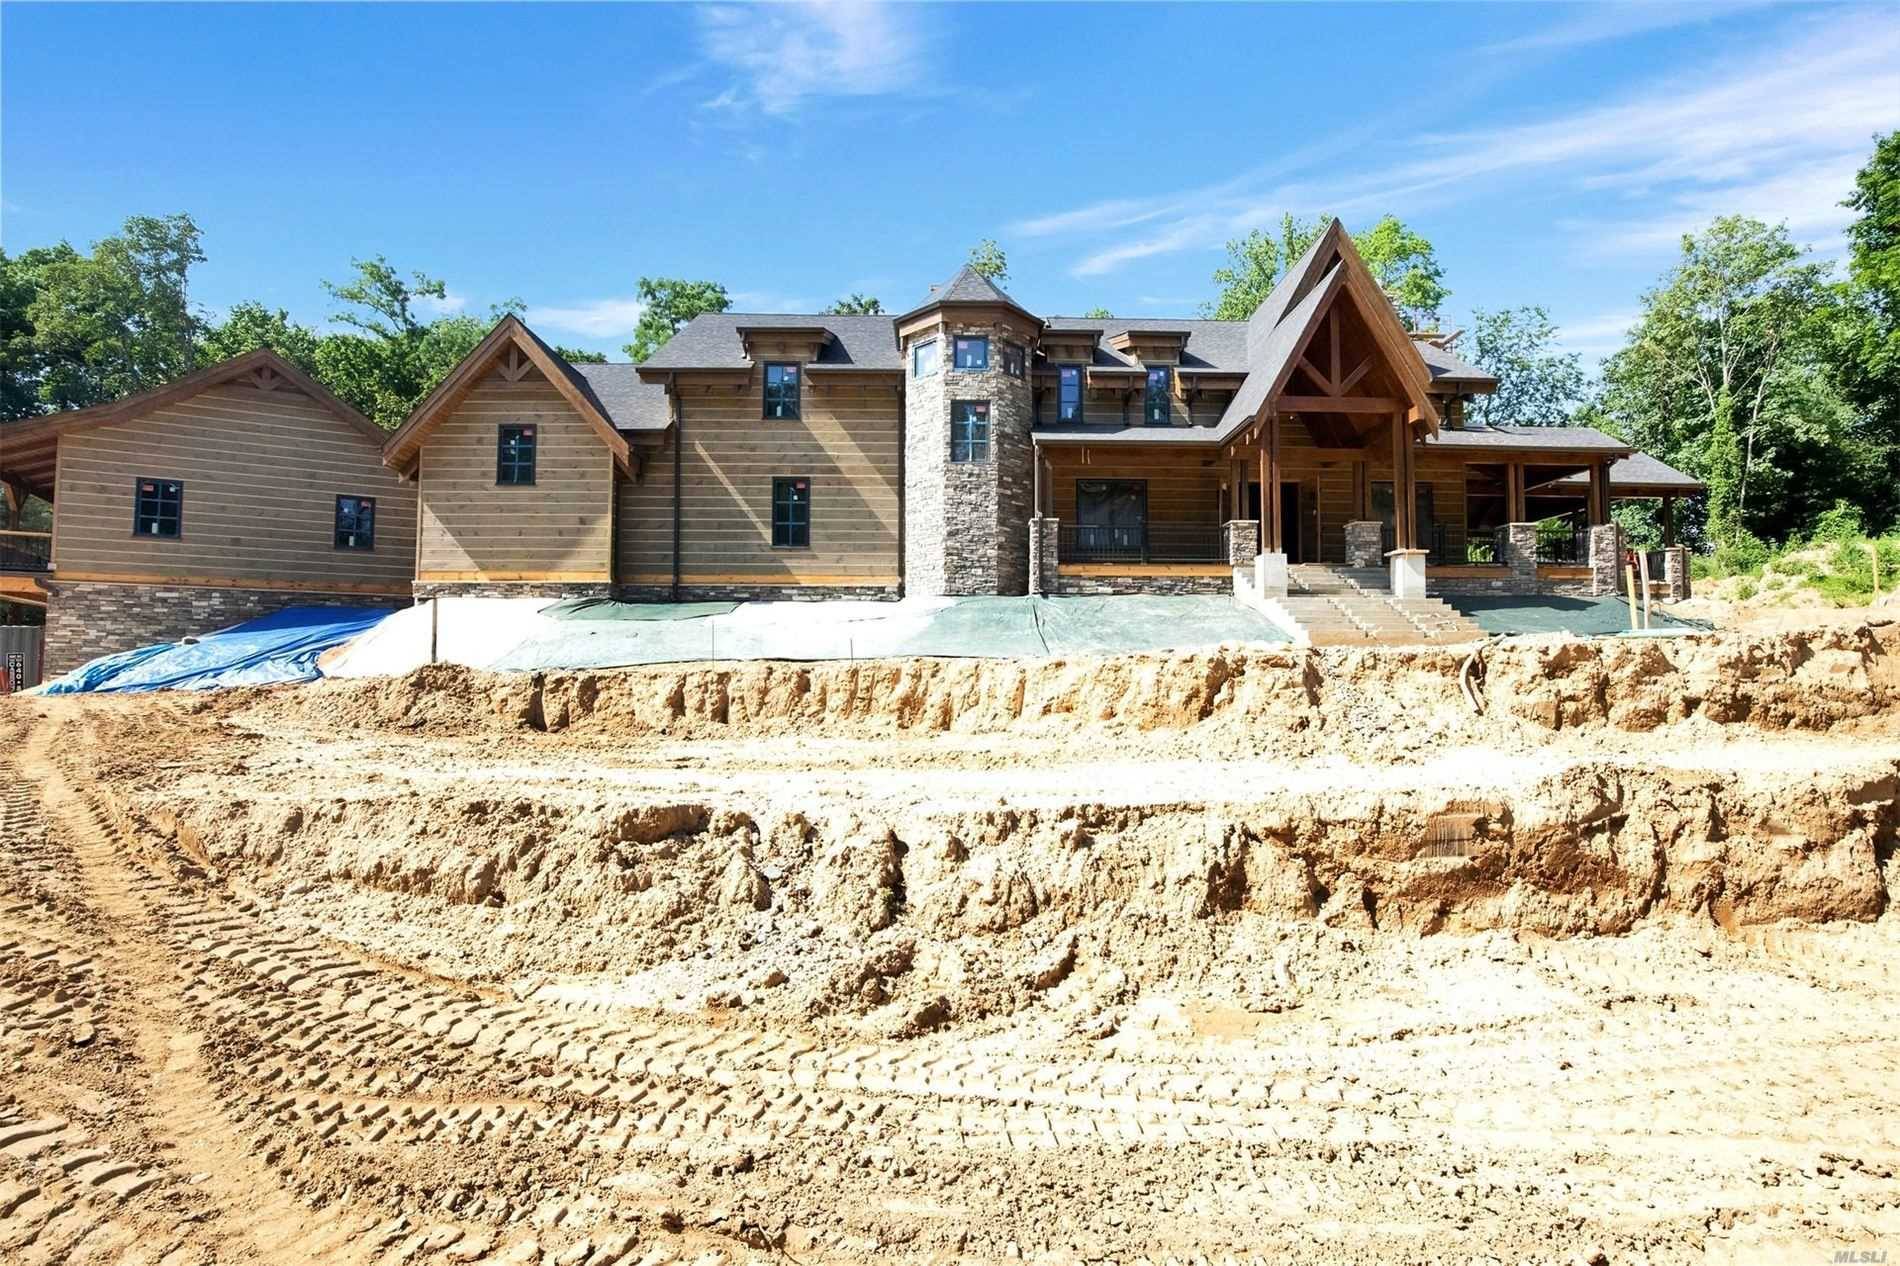 Prepare to be amazed as you view one of the most stunning log homes ever to be built on Long Island.